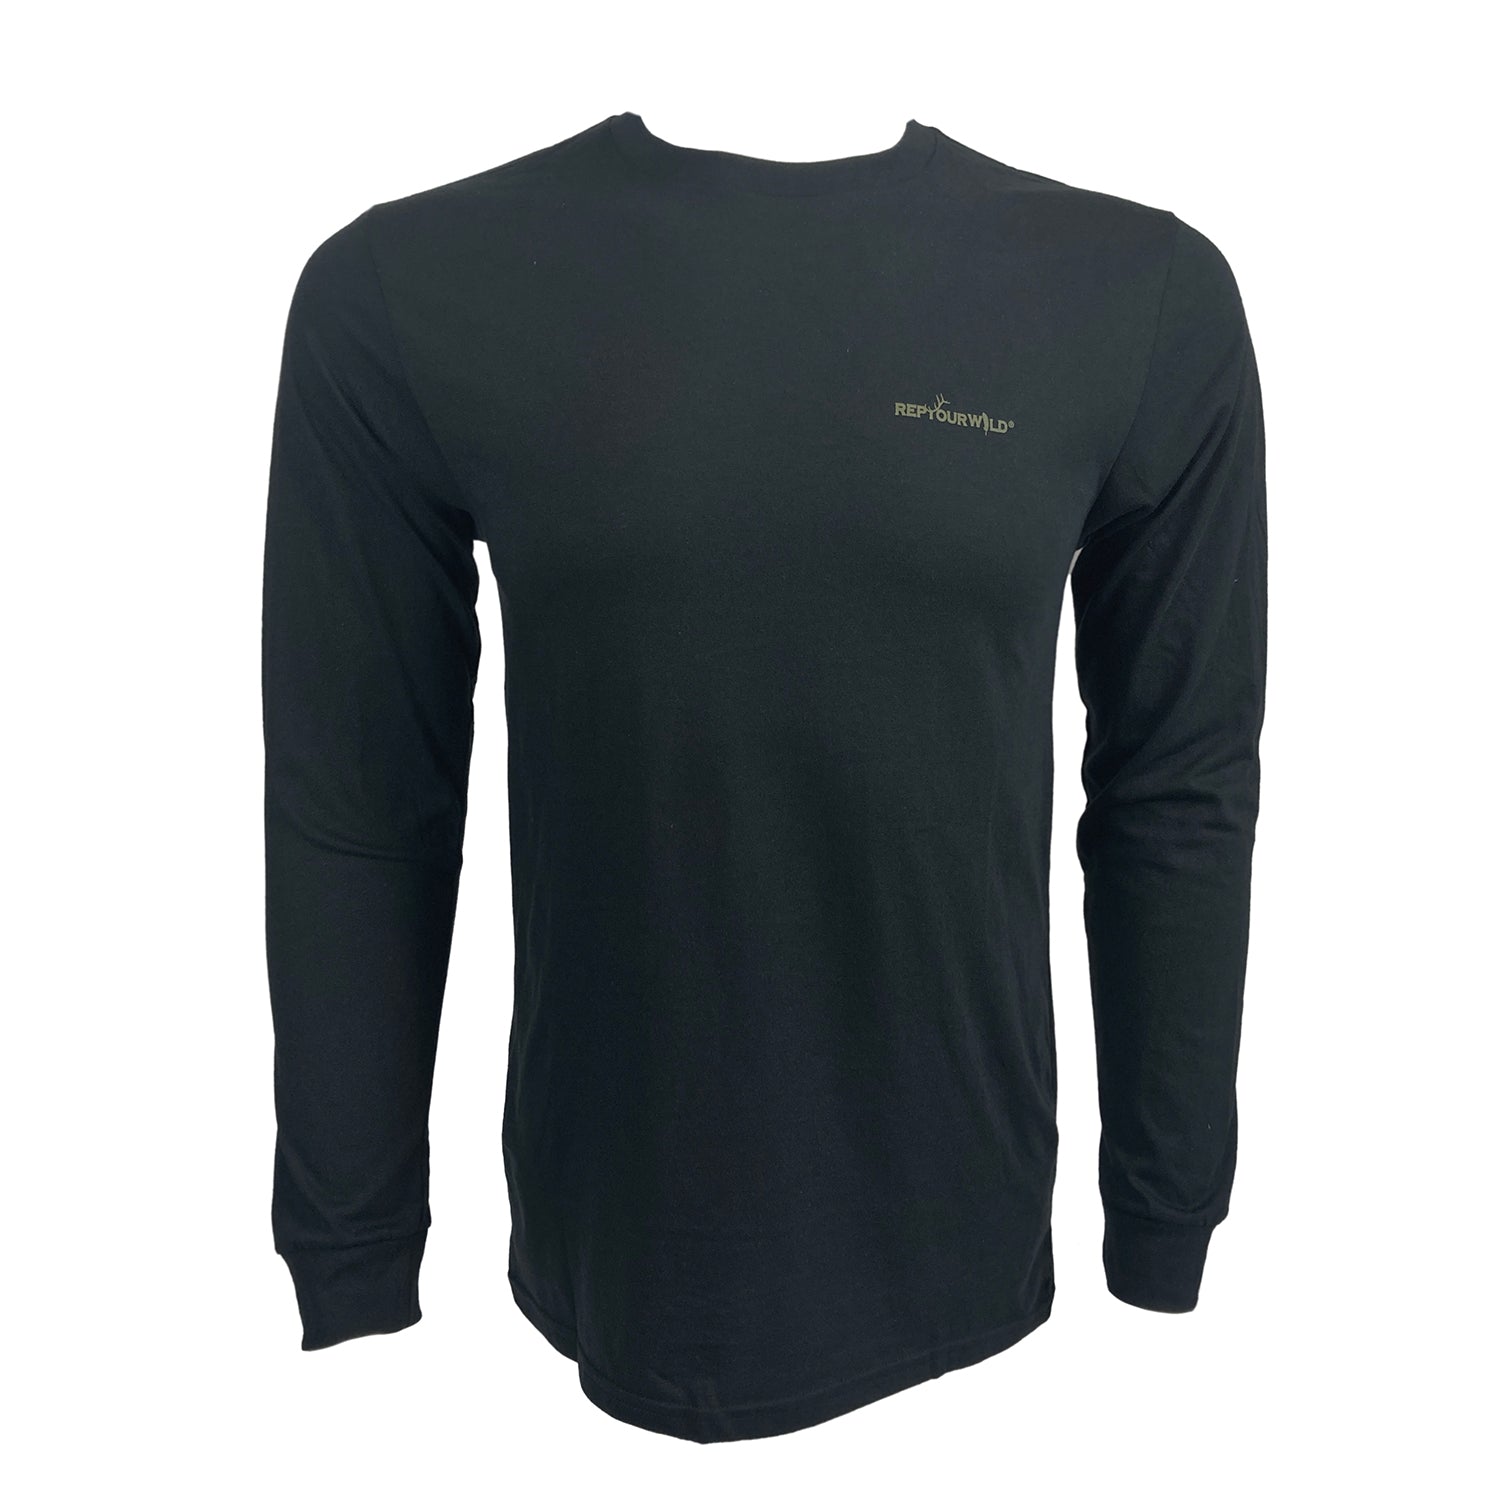 Black long sleeved tee shown from the front with olive Rep Your Wild logo on front left chest.